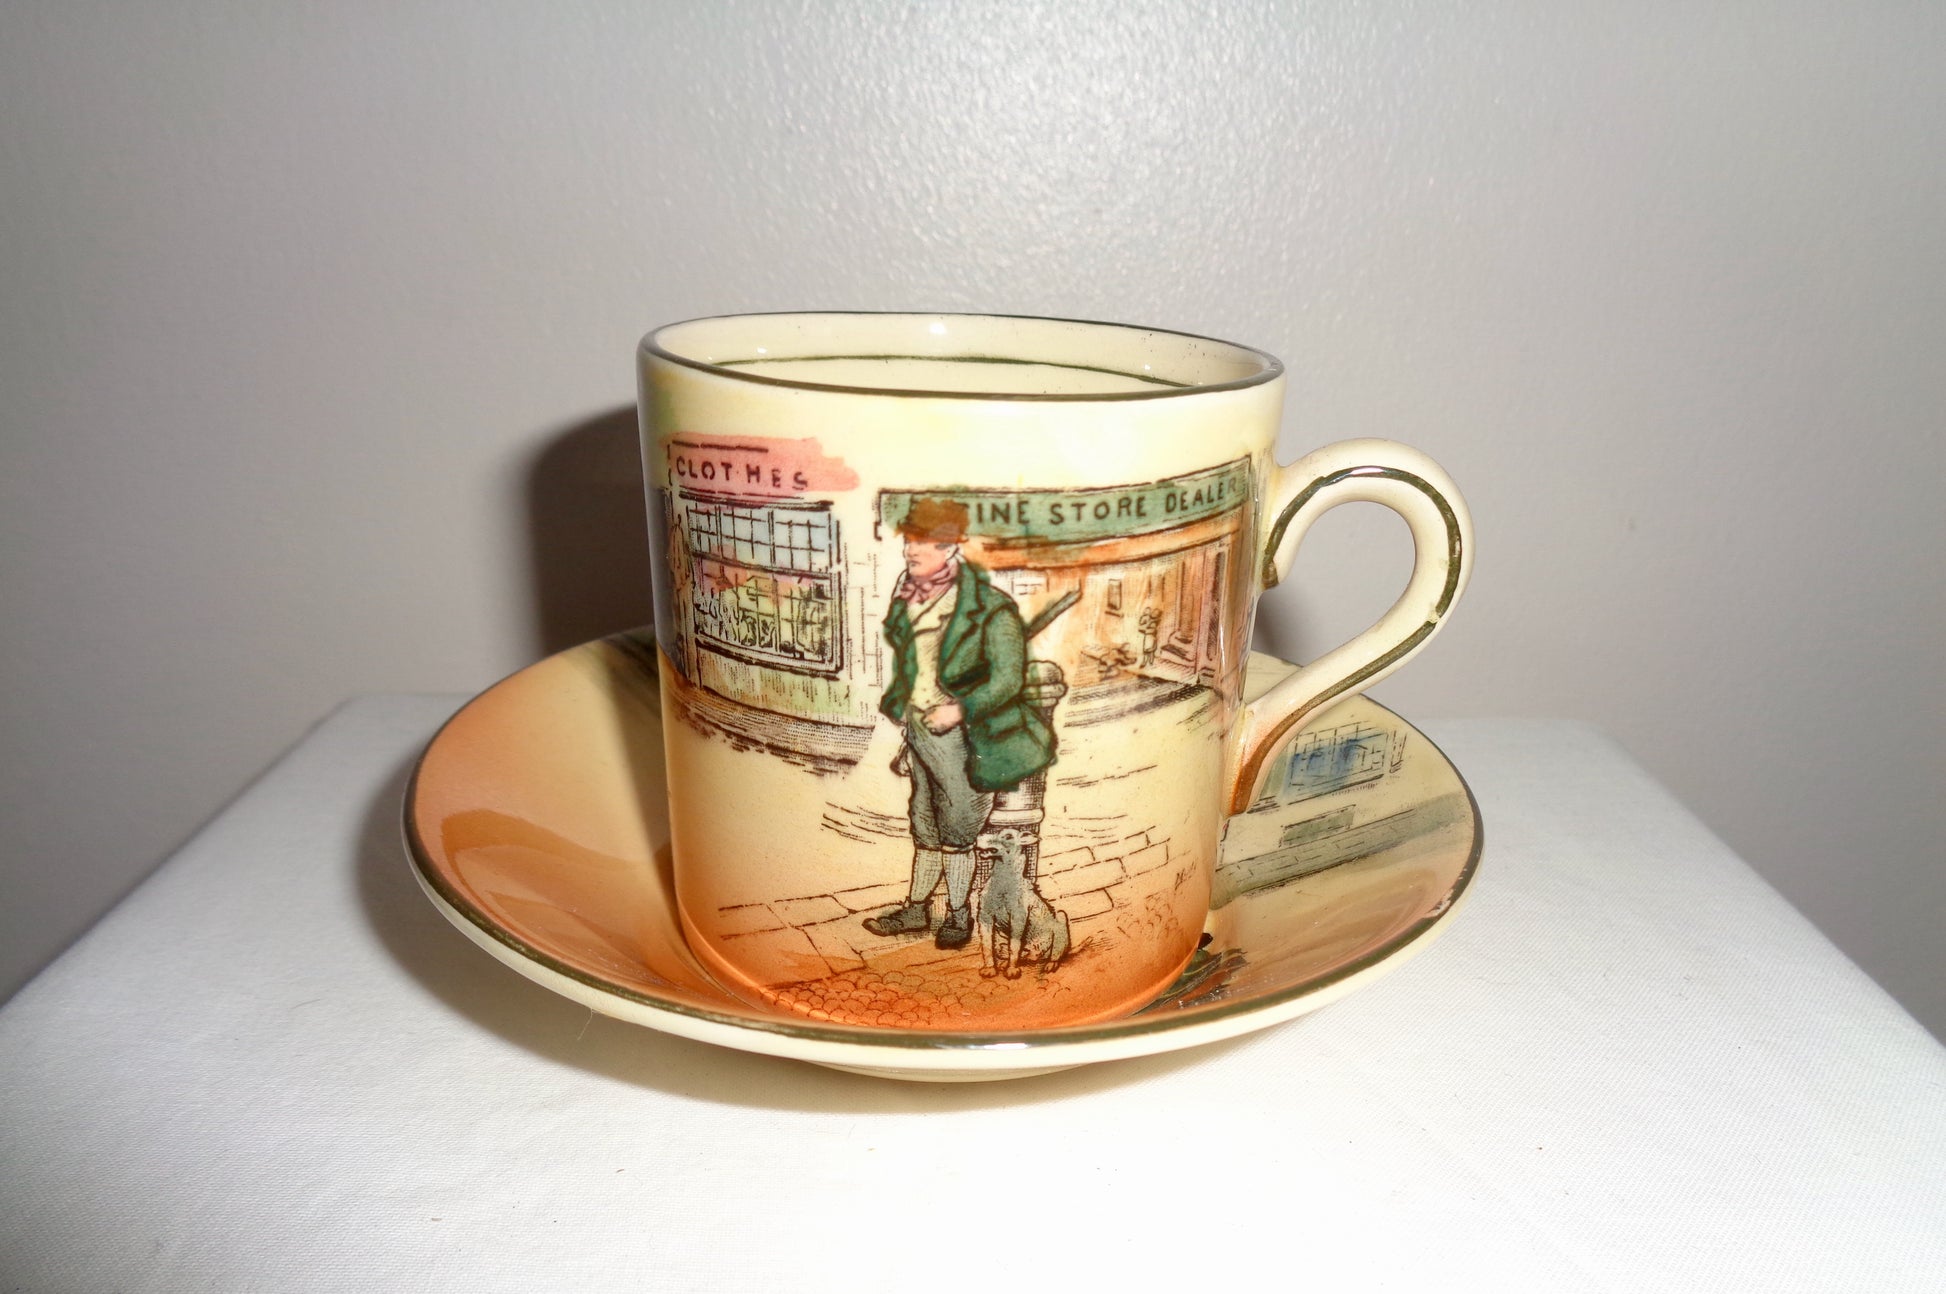 1930s Royal Doulton Dickens Ware Espresso Cup And Saucer. Pattern Number D5175 Signed By Noke